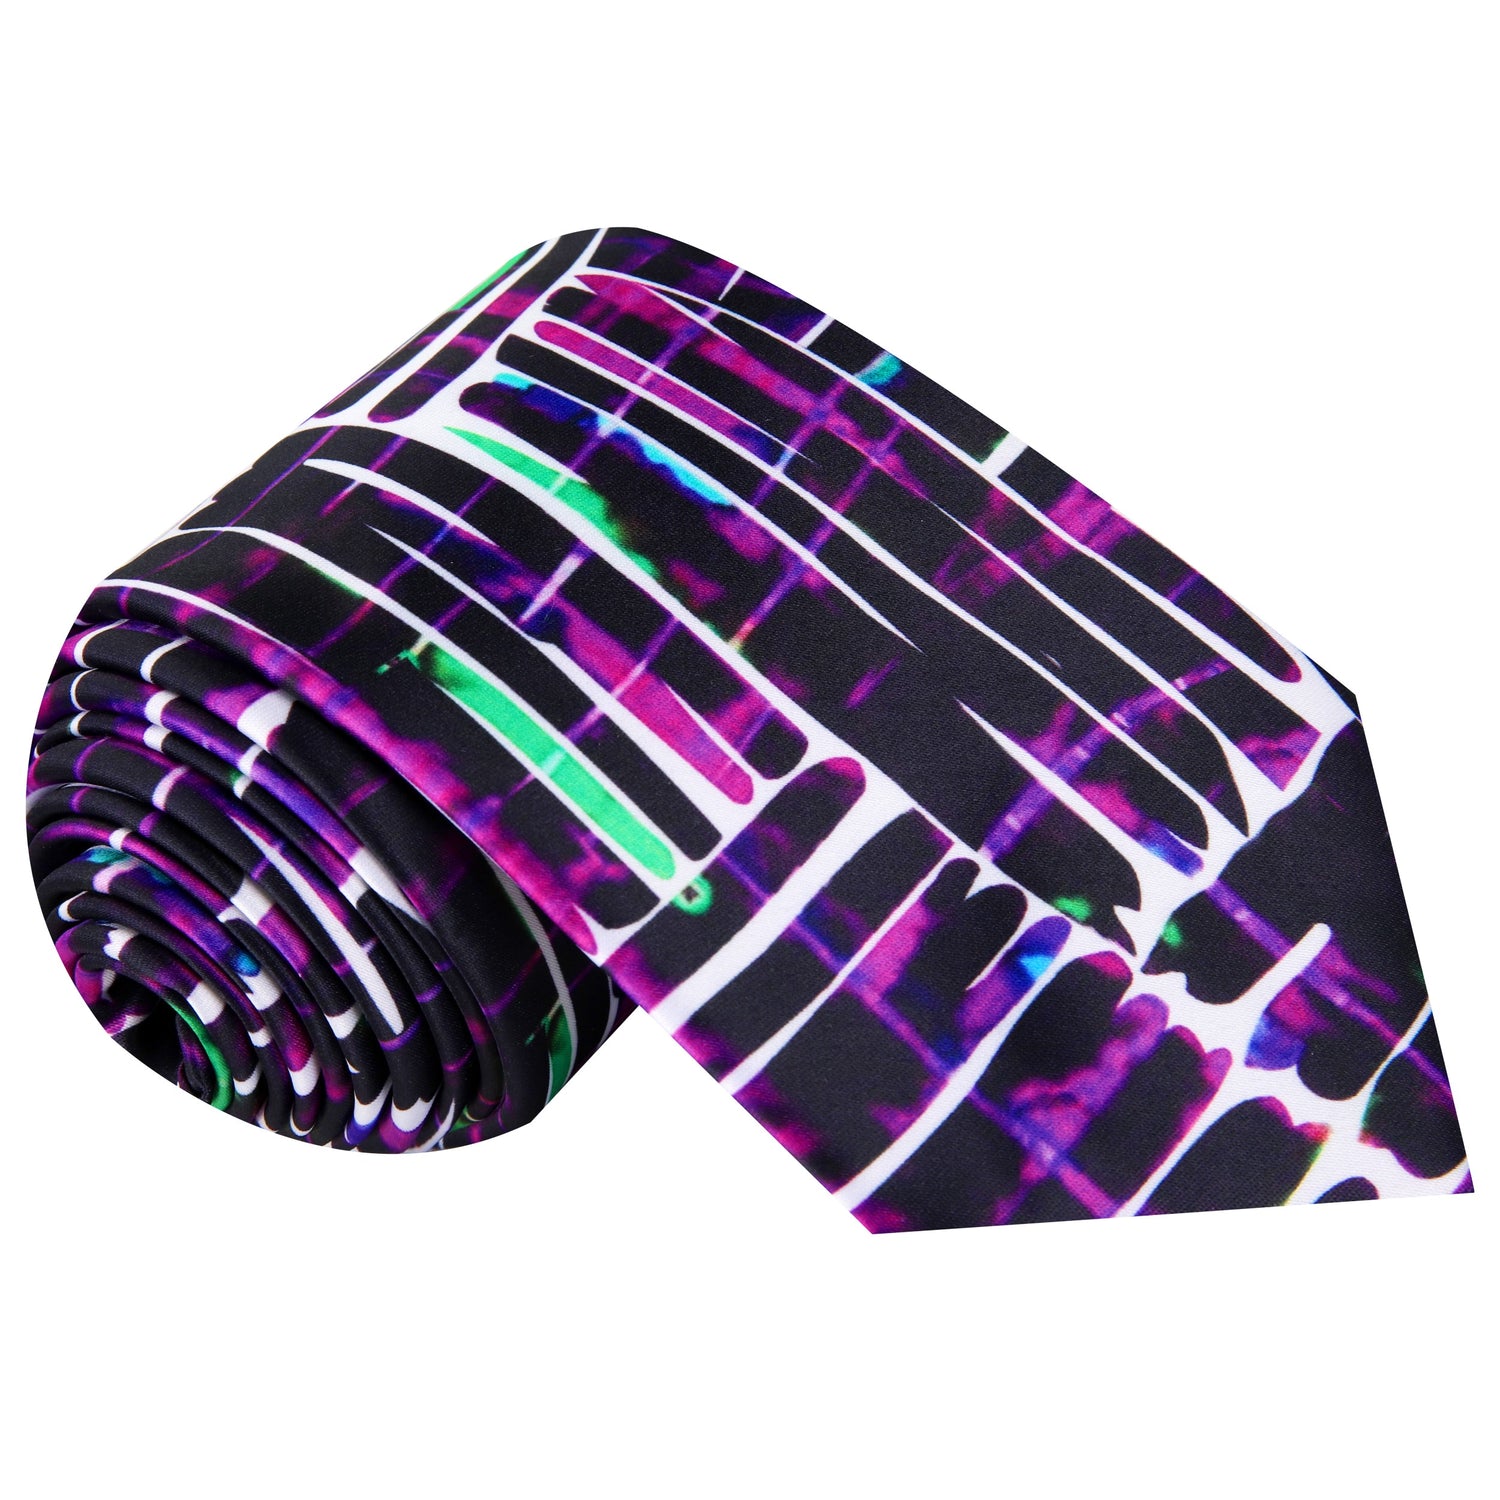 Rolled up: White, Fuchsia, Black Abstract necktie